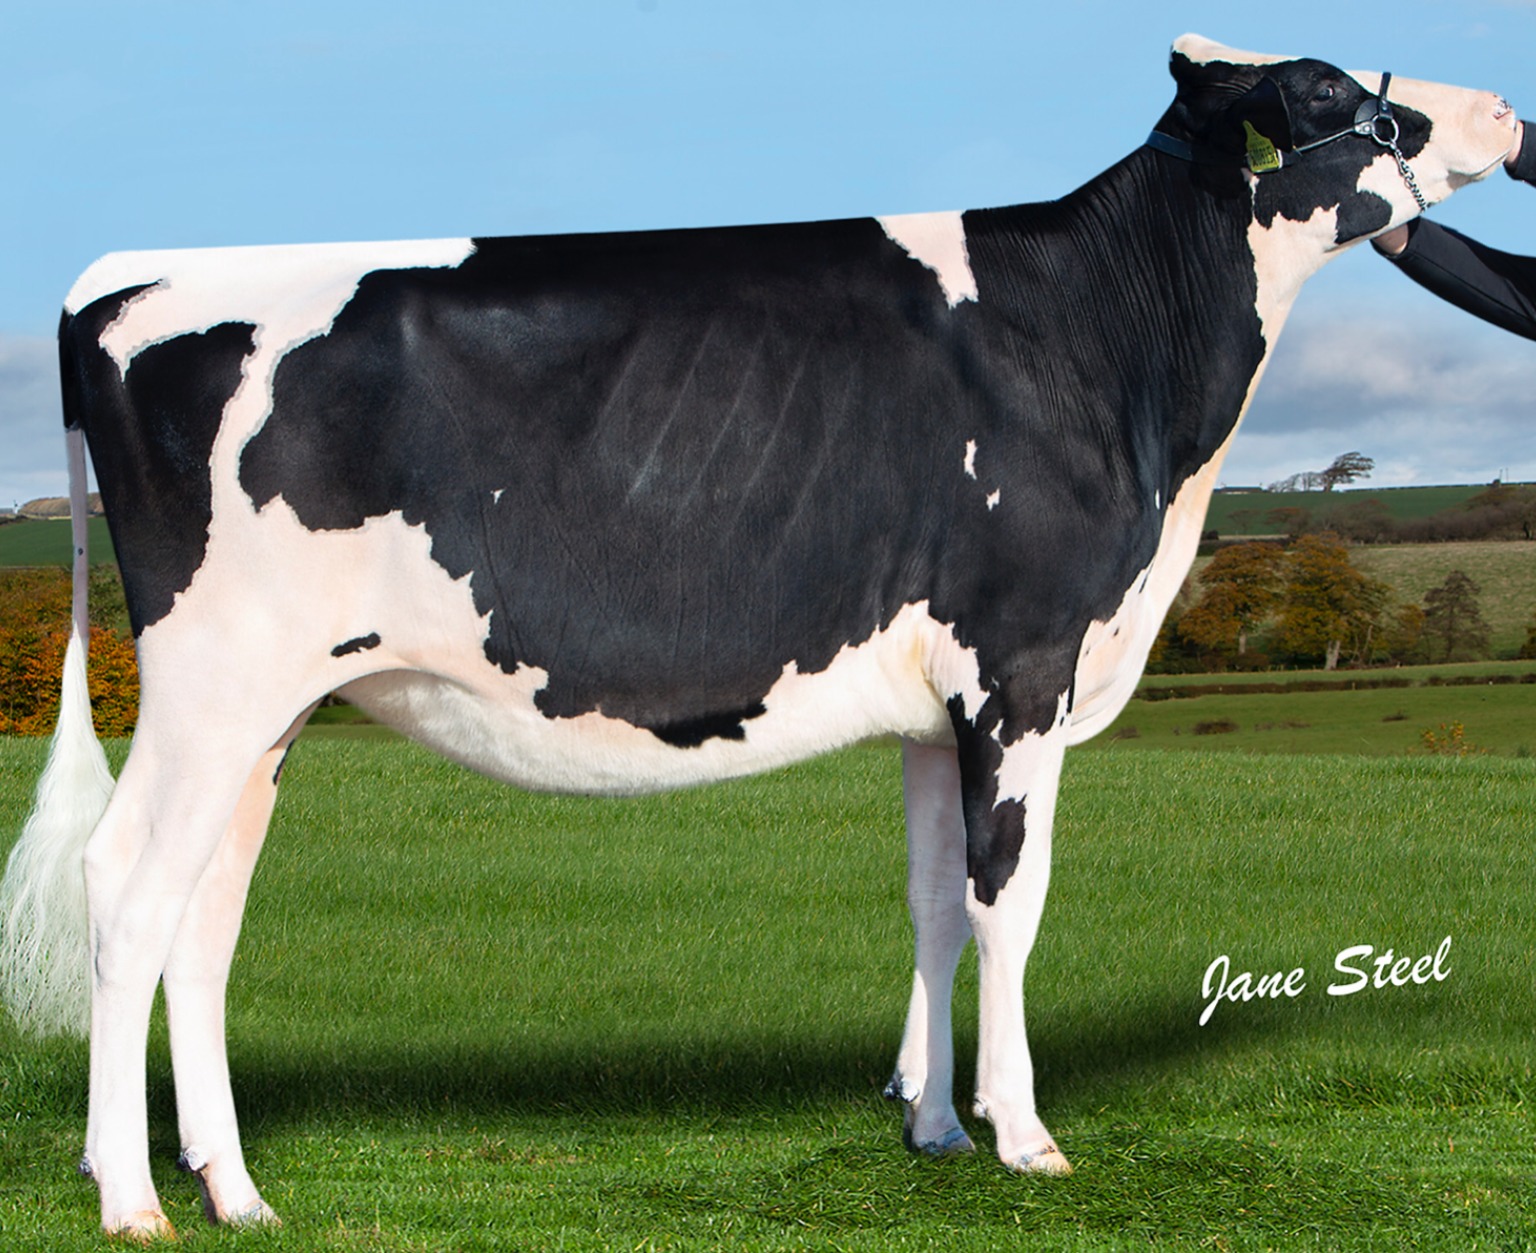 The most successful home-bred animal, Nethervalley Kingpin Sara, who sold for 10,000gns at the Black and White sale in 2019